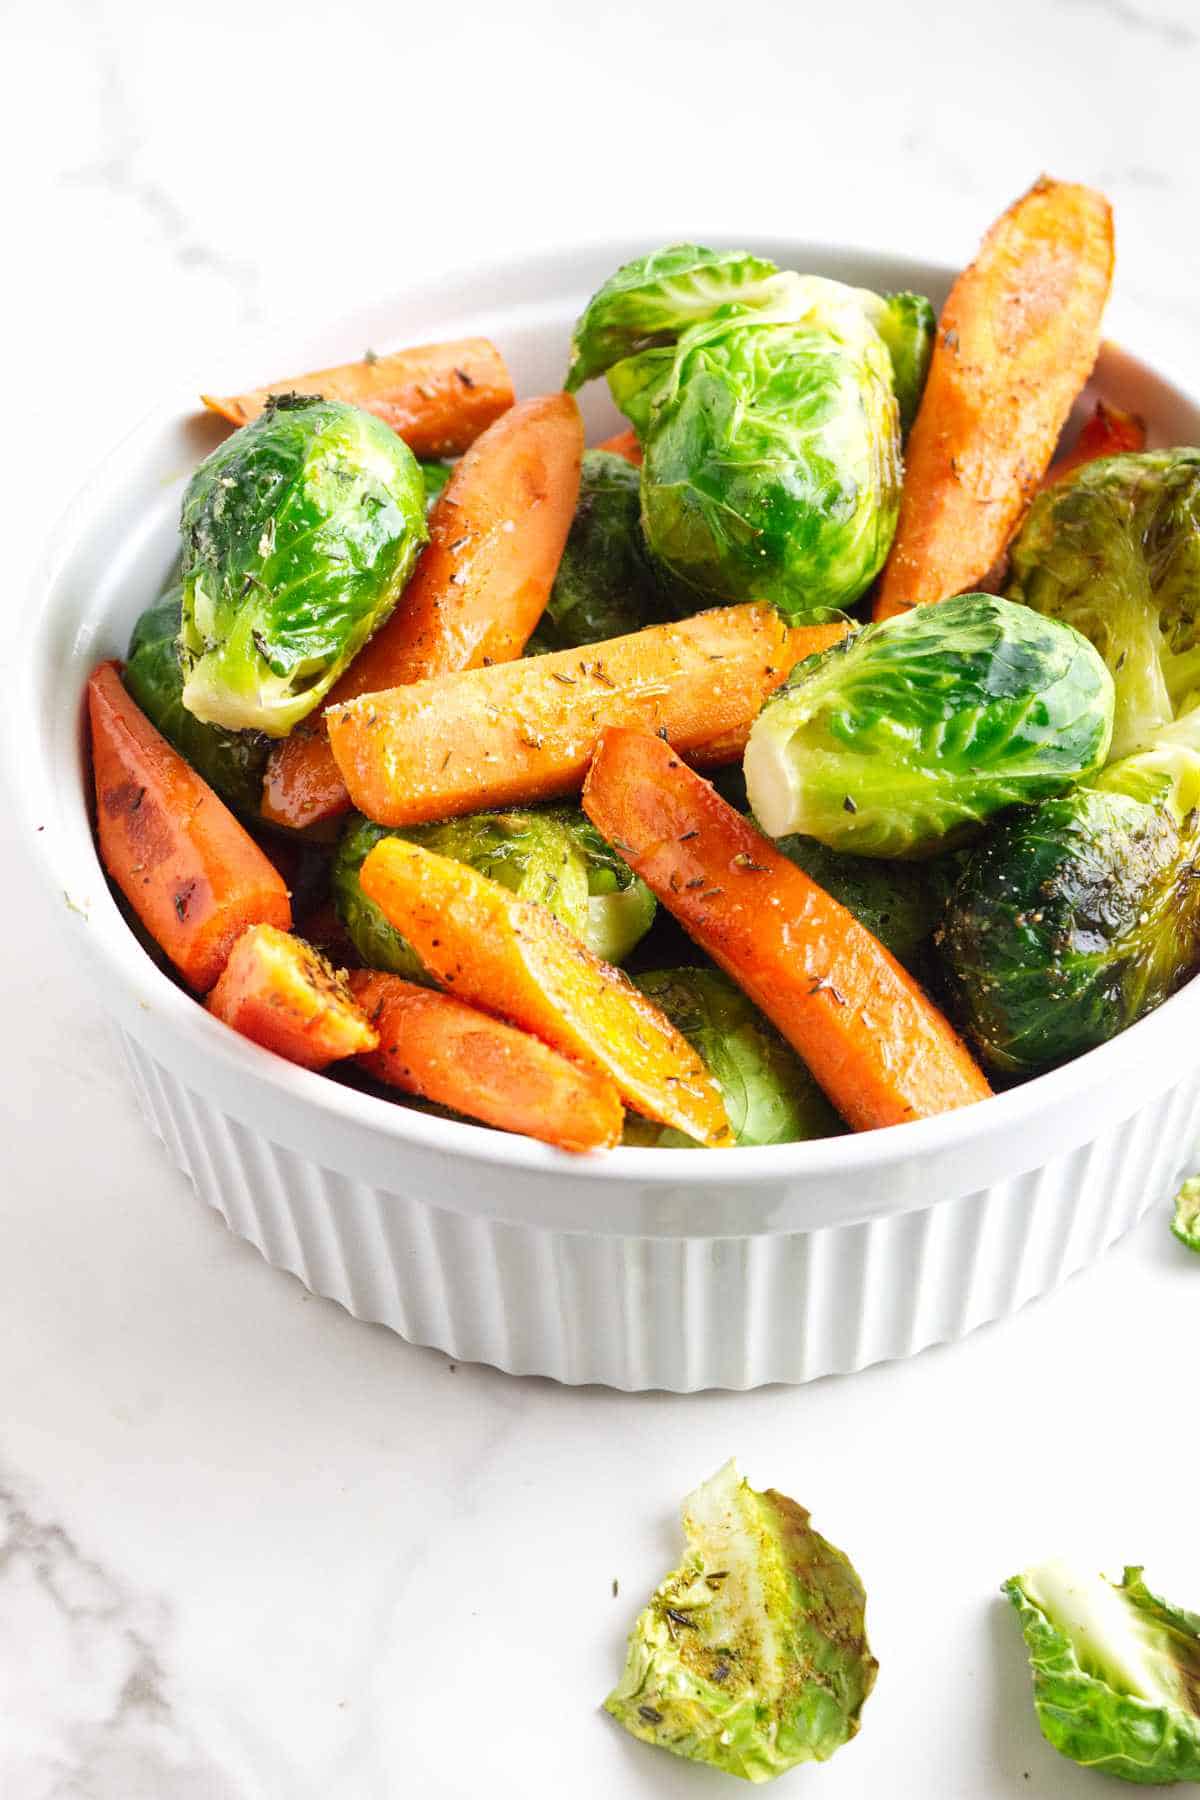 serving bowl heaped with roasted brussel sprouts and carrots.